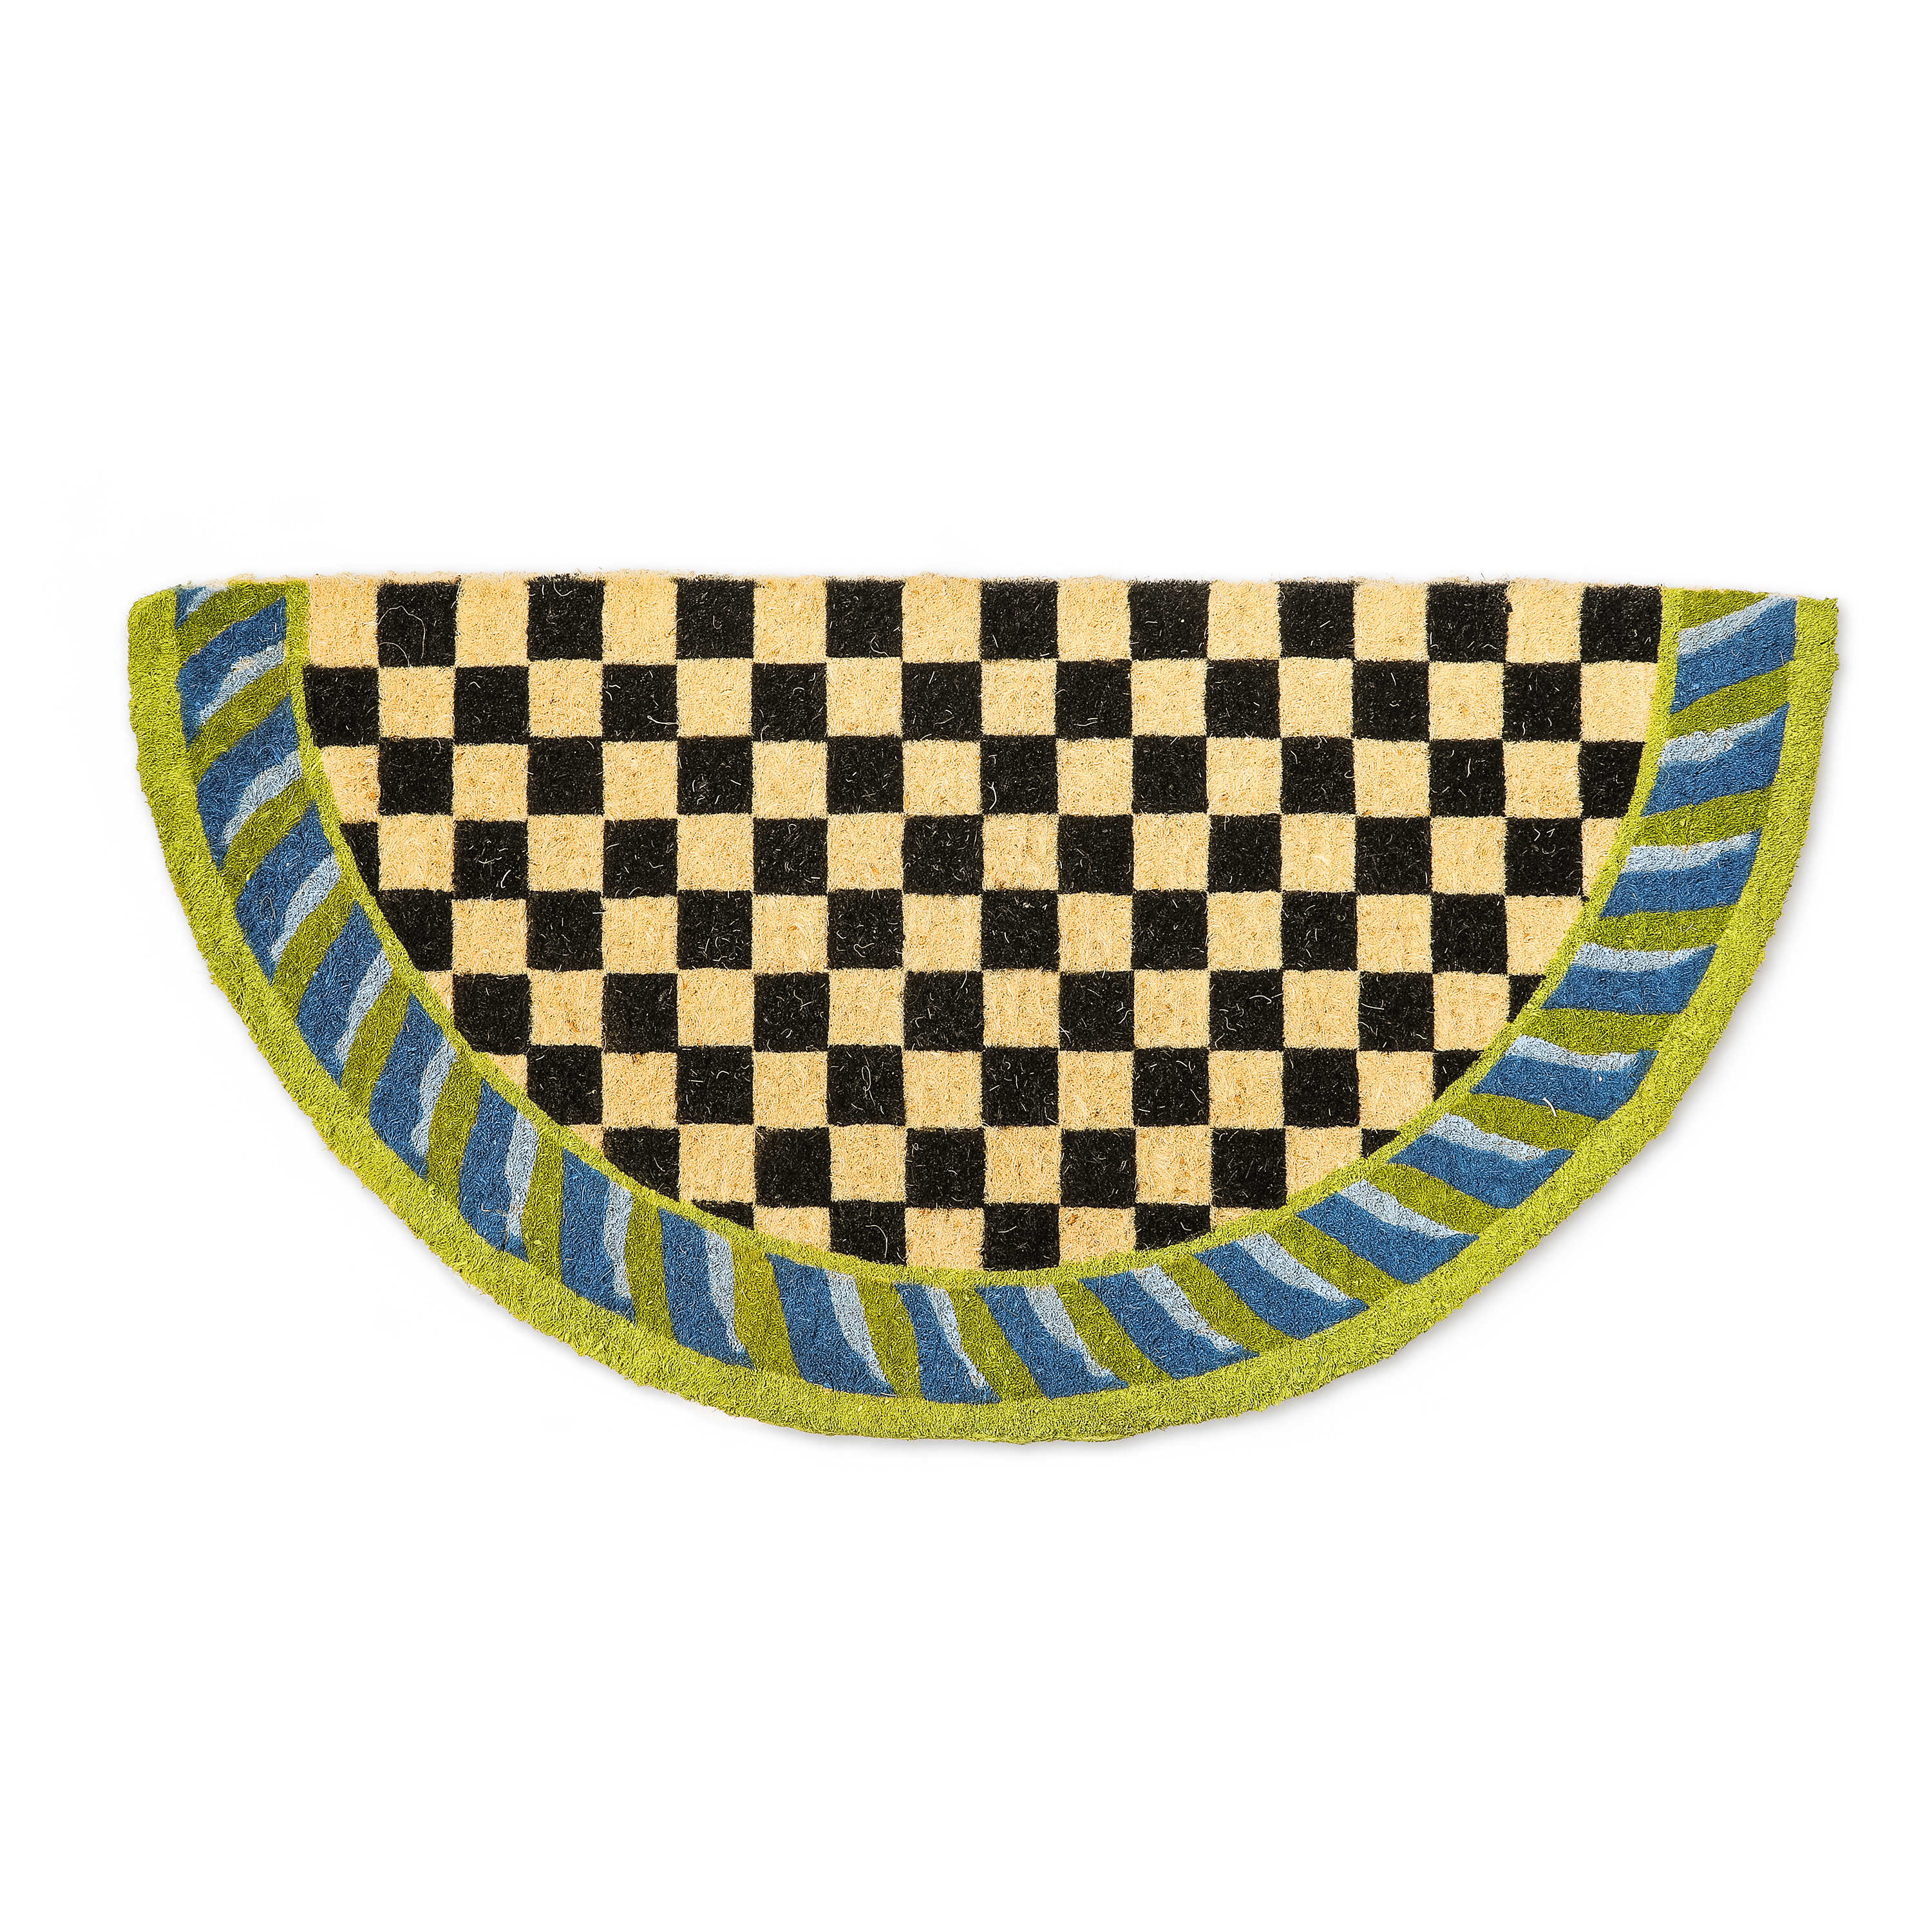 Courtly Check Half Round Blue & Green Entrance Mat mackenzie-childs Panama 0